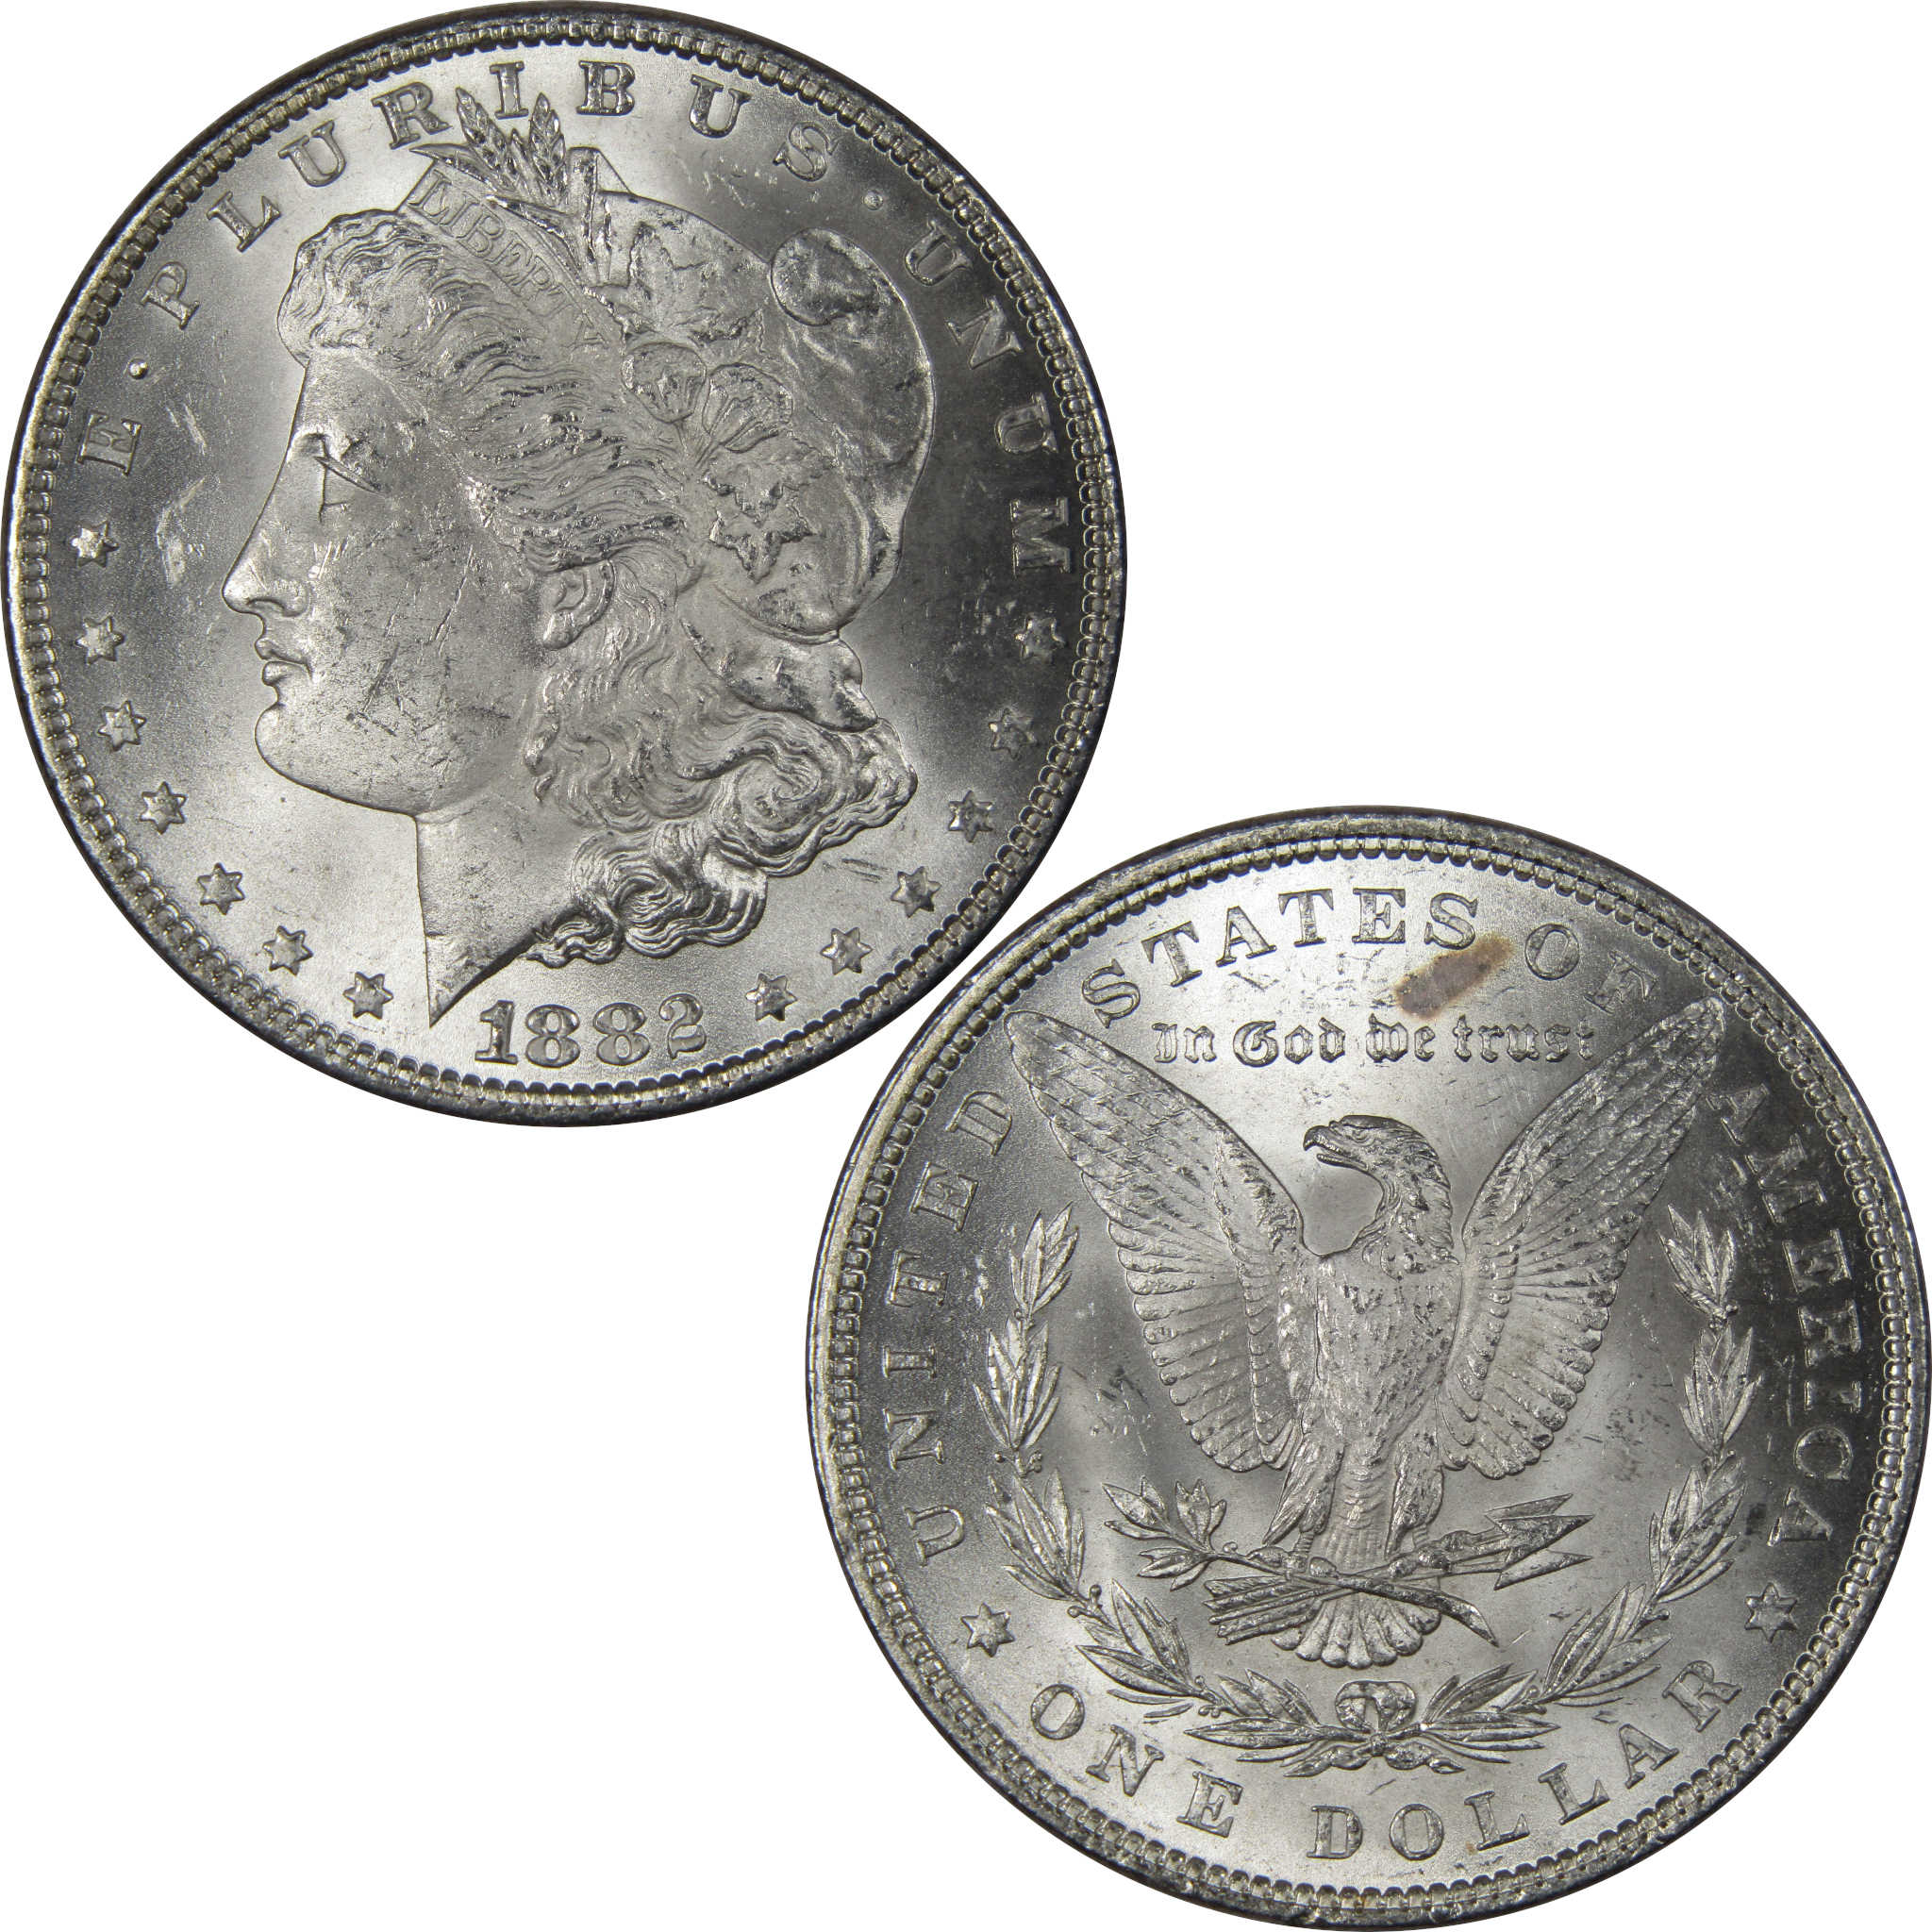 1882 Morgan Dollar BU Uncirculated Mint State 90% Silver SKU:IPC9706 - Morgan coin - Morgan silver dollar - Morgan silver dollar for sale - Profile Coins &amp; Collectibles